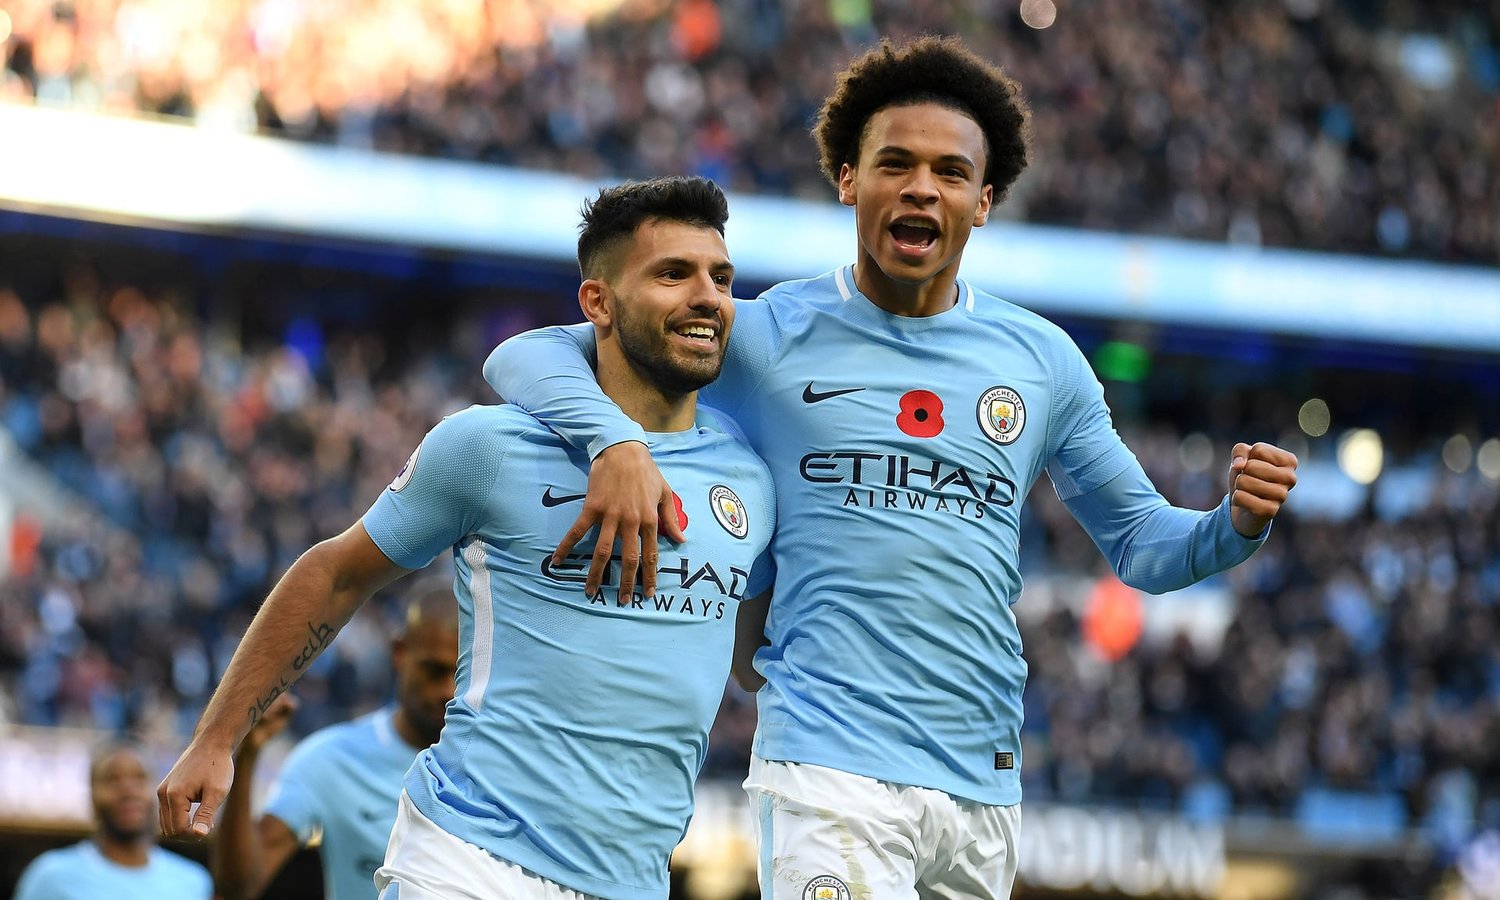 Sergio Agüero, left, and Leroy Sané have helped Manchester City open an eight-point gap at the top of the Premier League by winning 10 of their first 11 games. Photograph: Laurence Griffiths/Getty Images